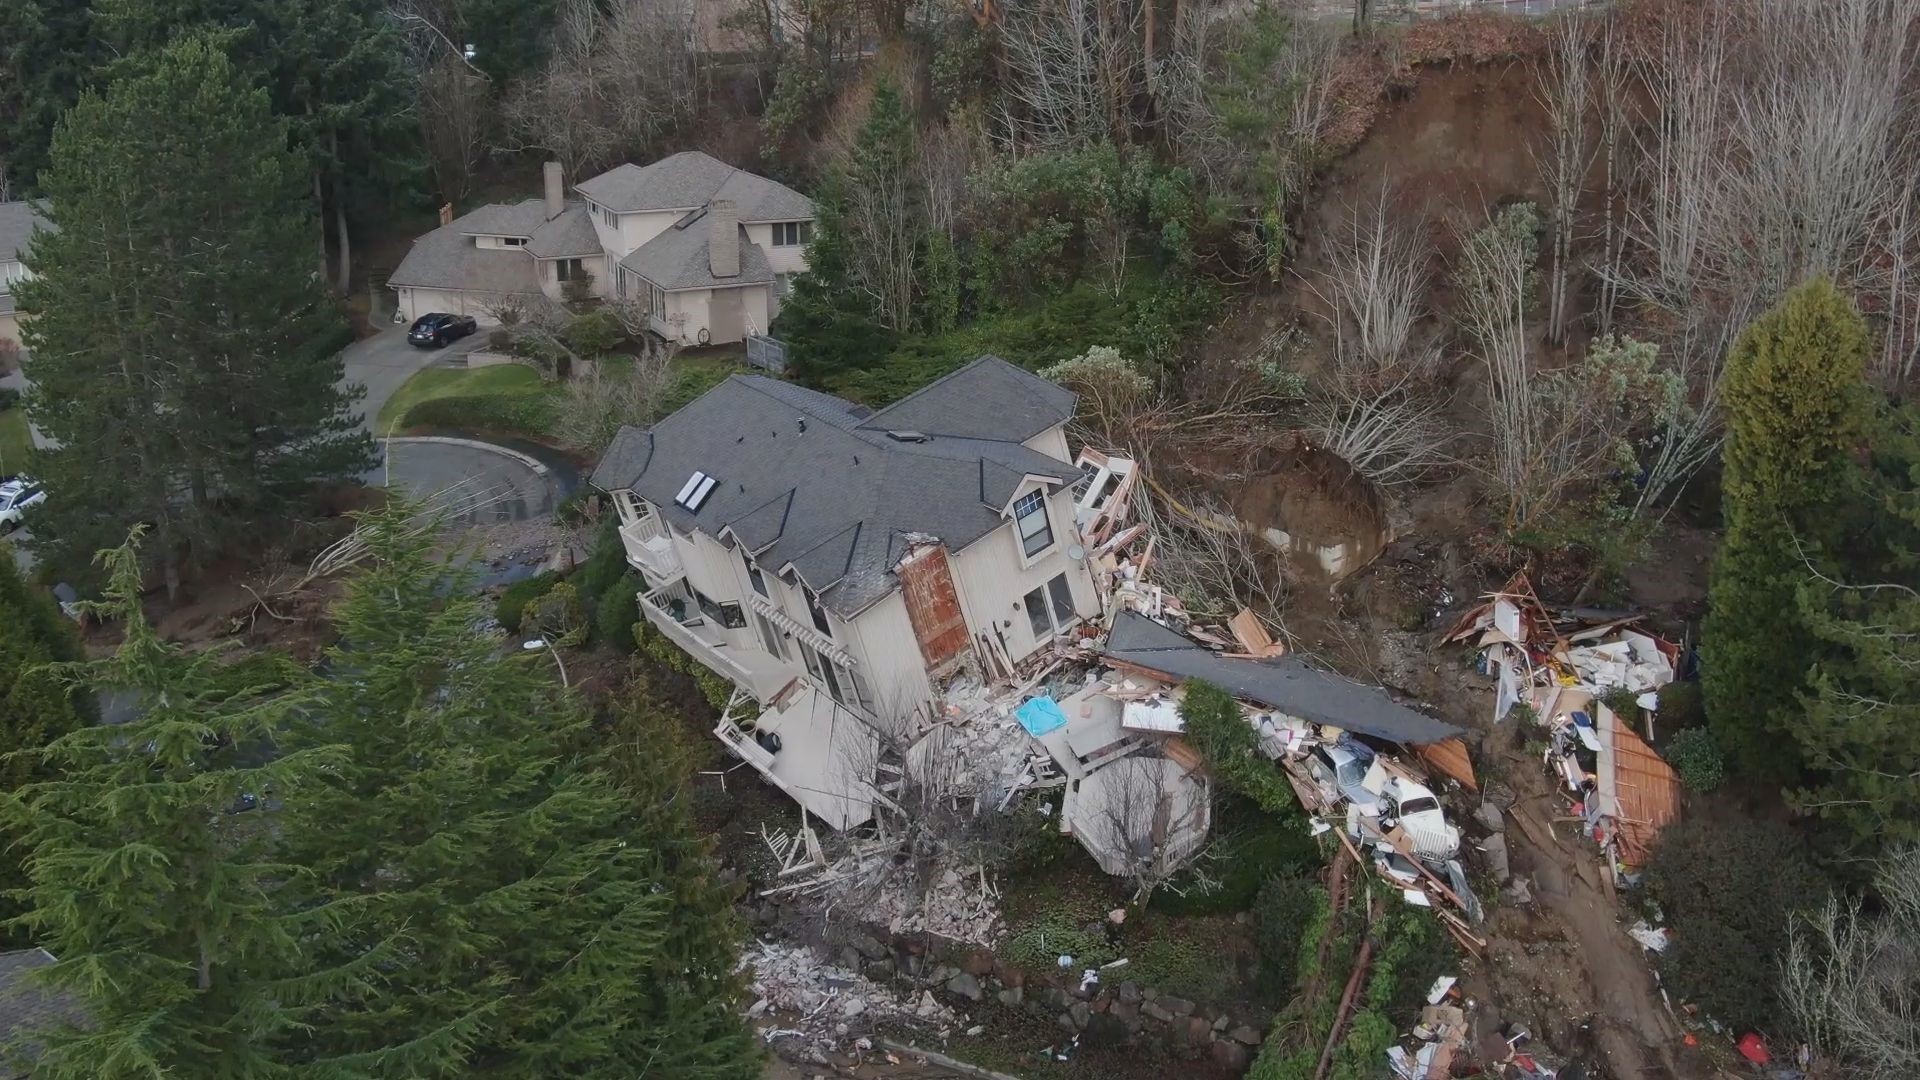 One of KING 5's drones captured an aerial view of the wreckage after a home slid off its foundation and collapsed in Bellevue on Jan. 17, 2022.